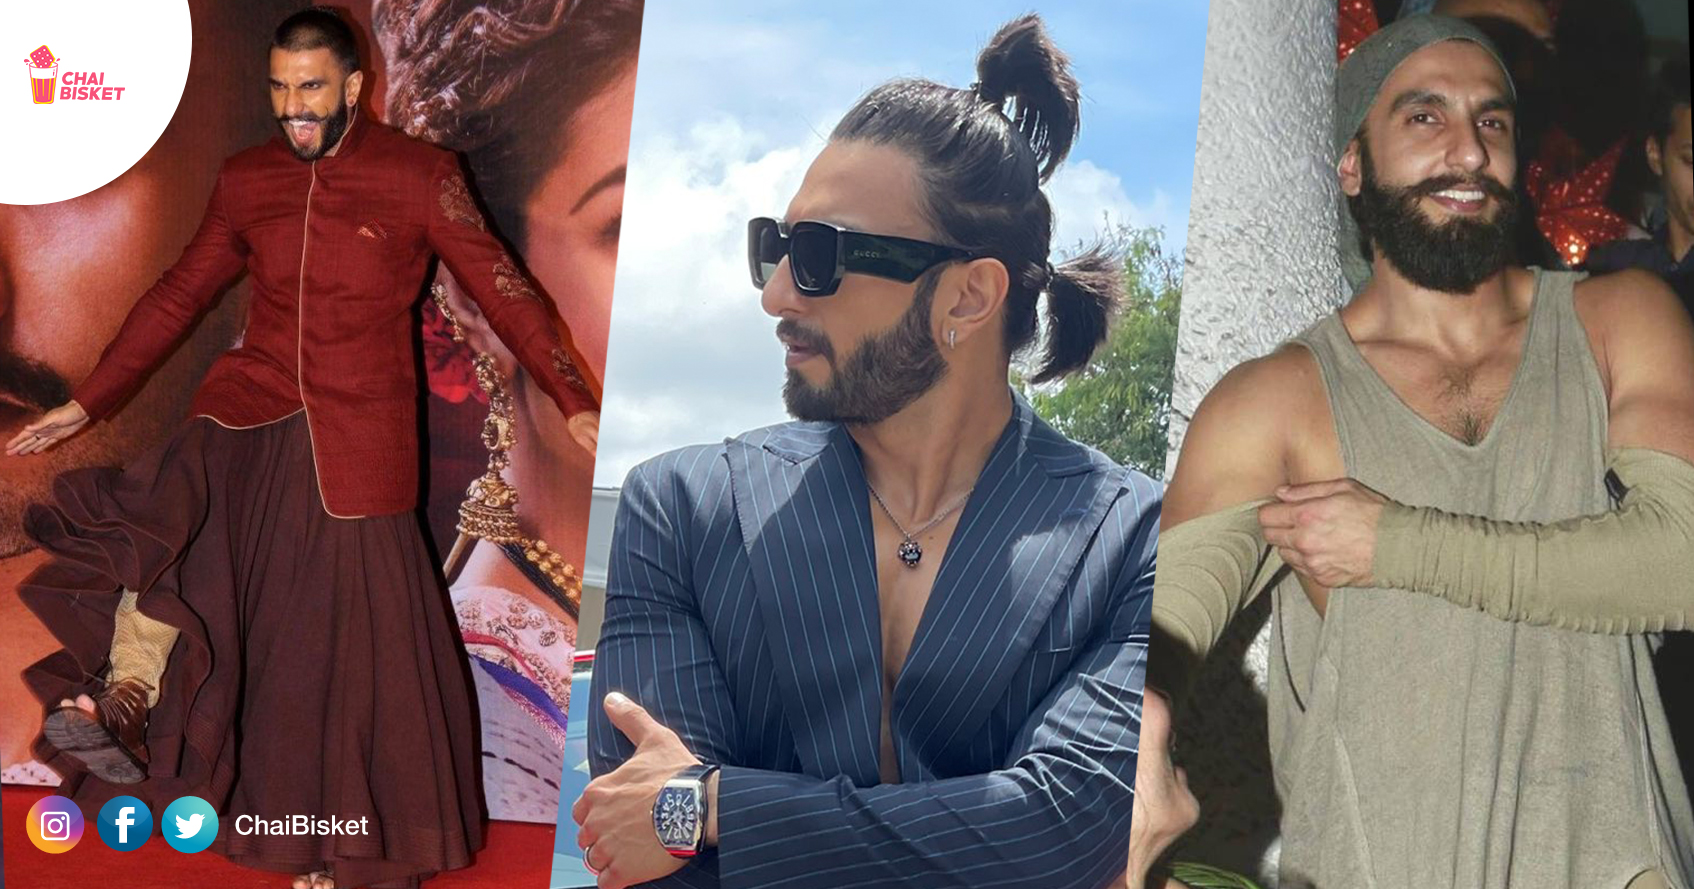 20 Quirky Outfits That Only Ranveer Singh Could Have Pulled Off - ScoopWhoop